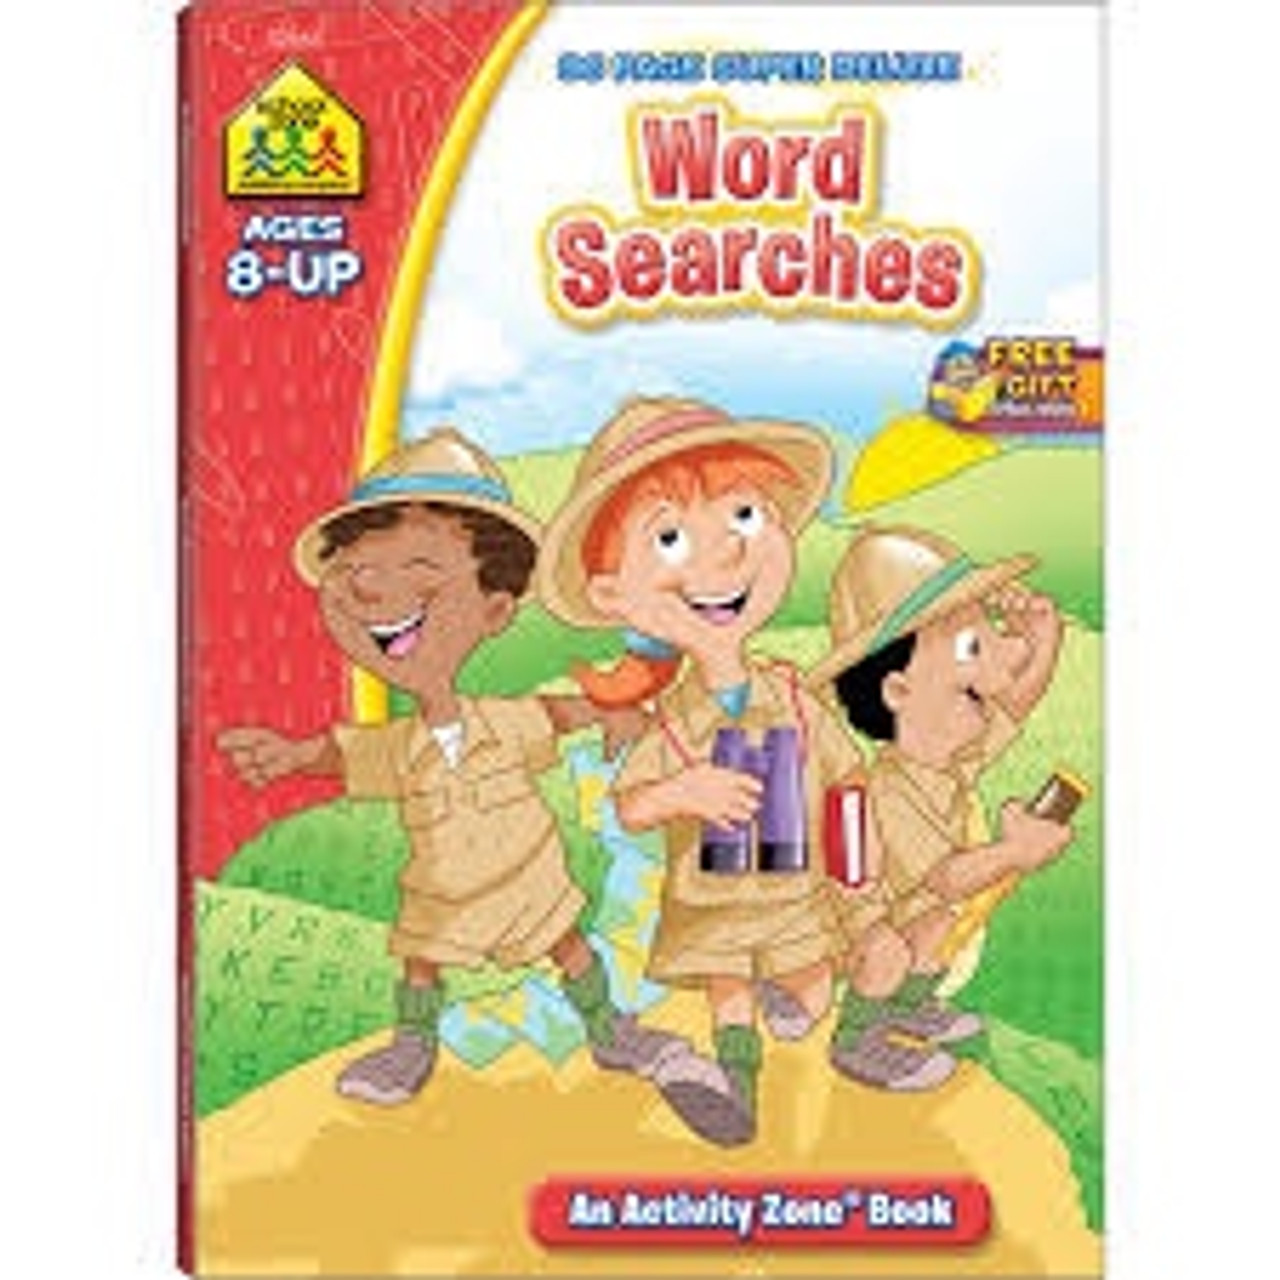 WORD SEARCHES SUPER DELUXE